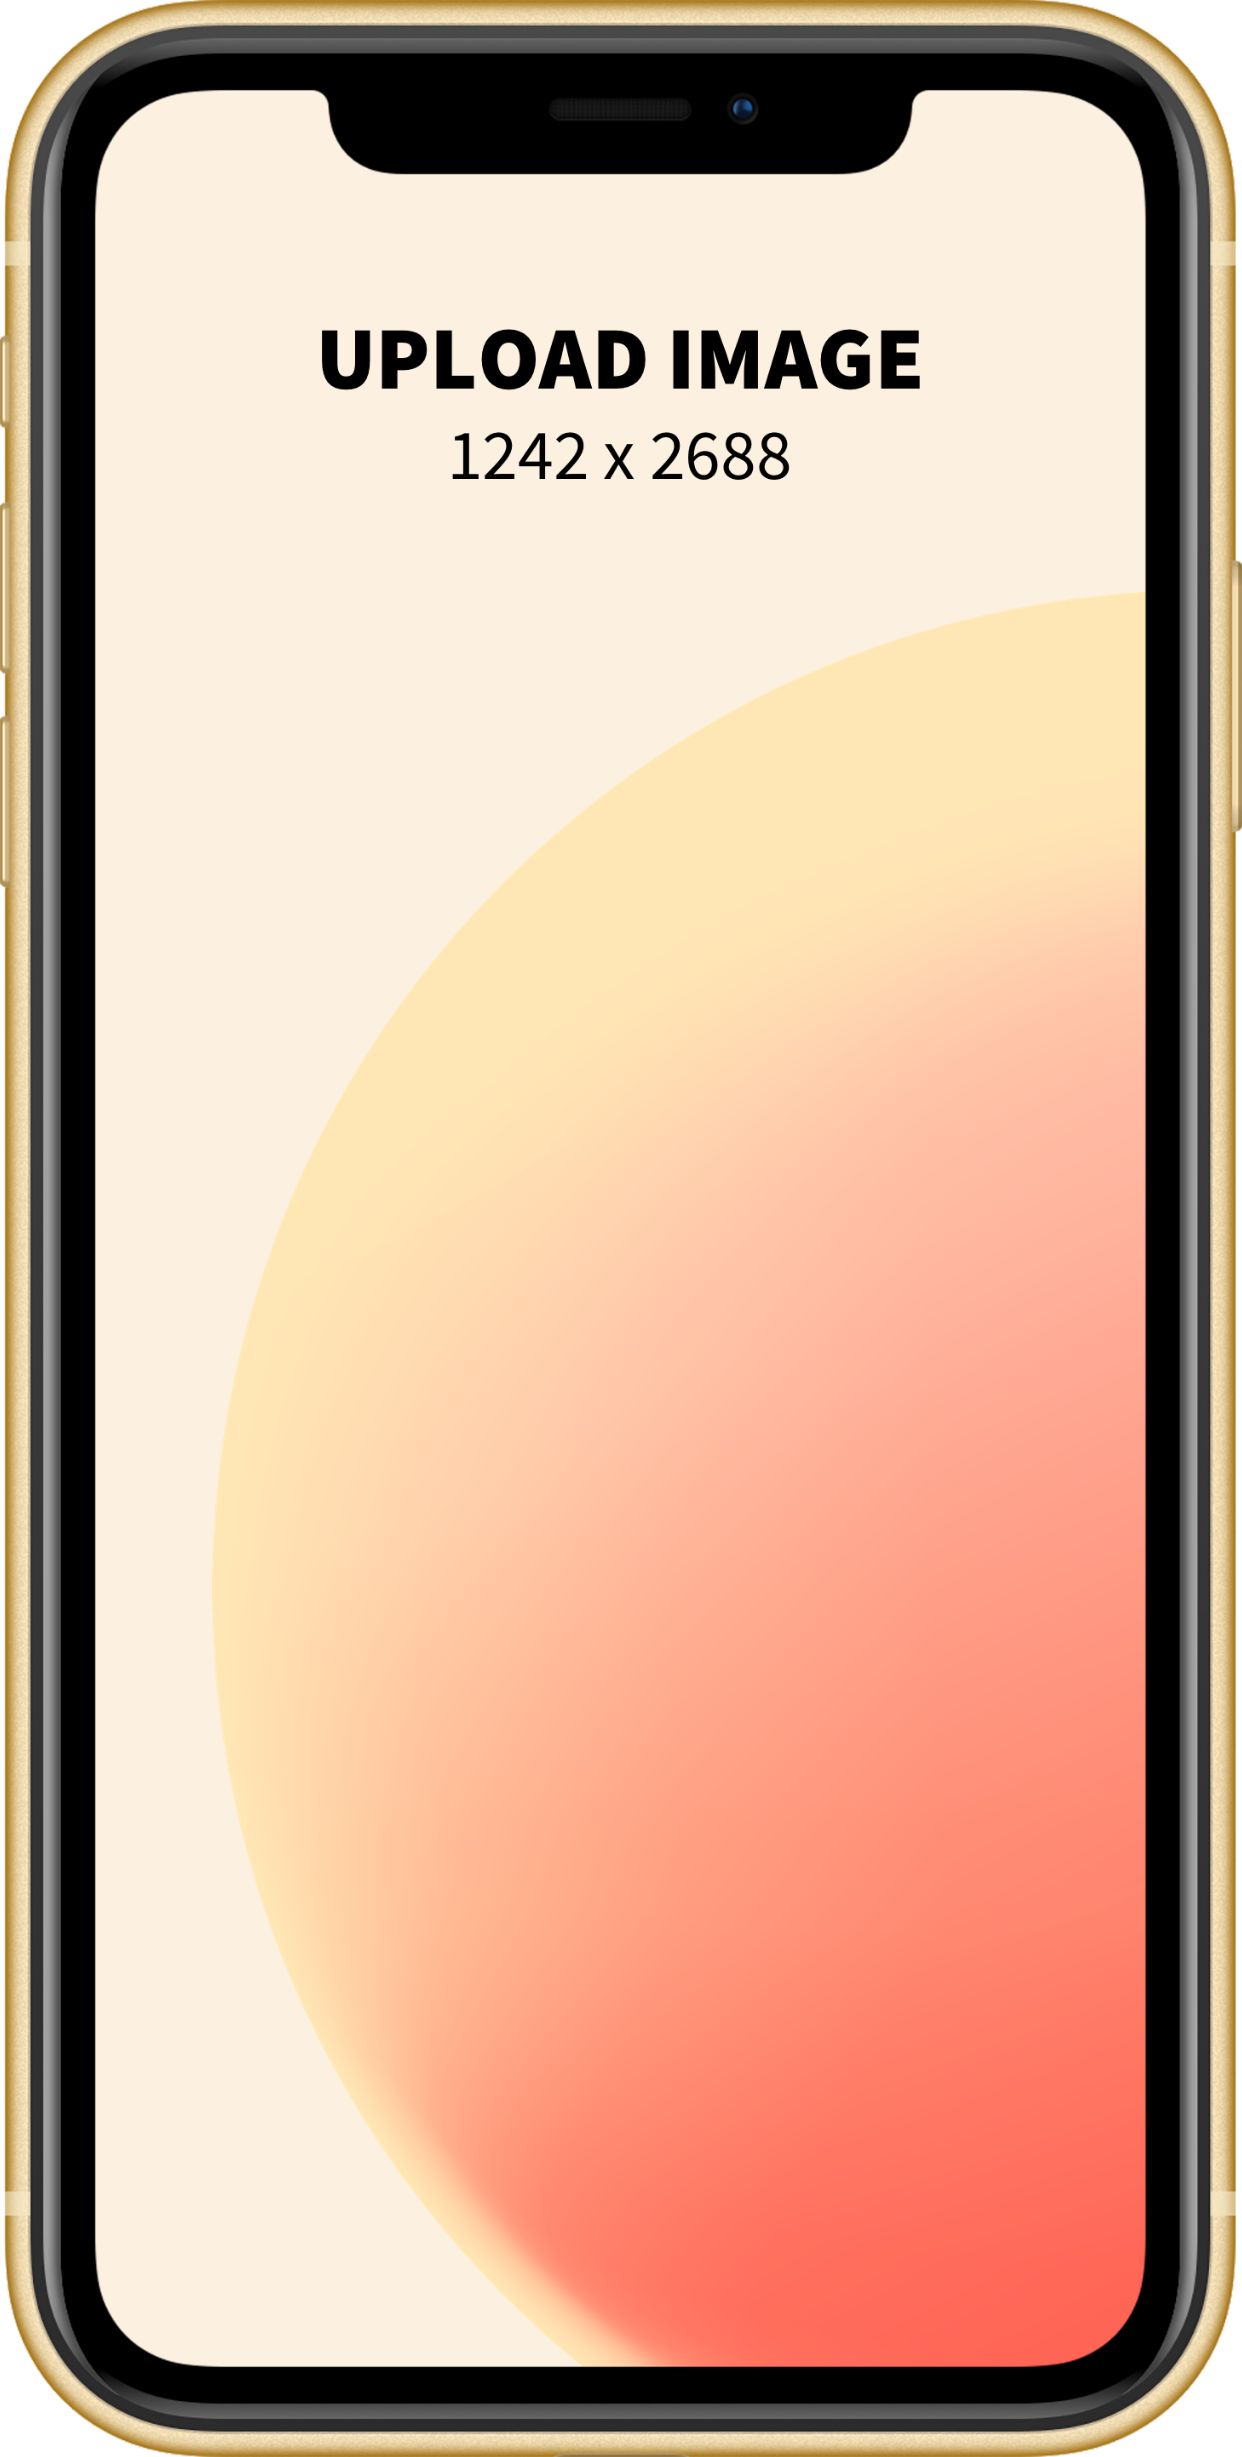 iPhone XS Max Mockup 2 template. Quickly edit text, colors, images, and more for free.